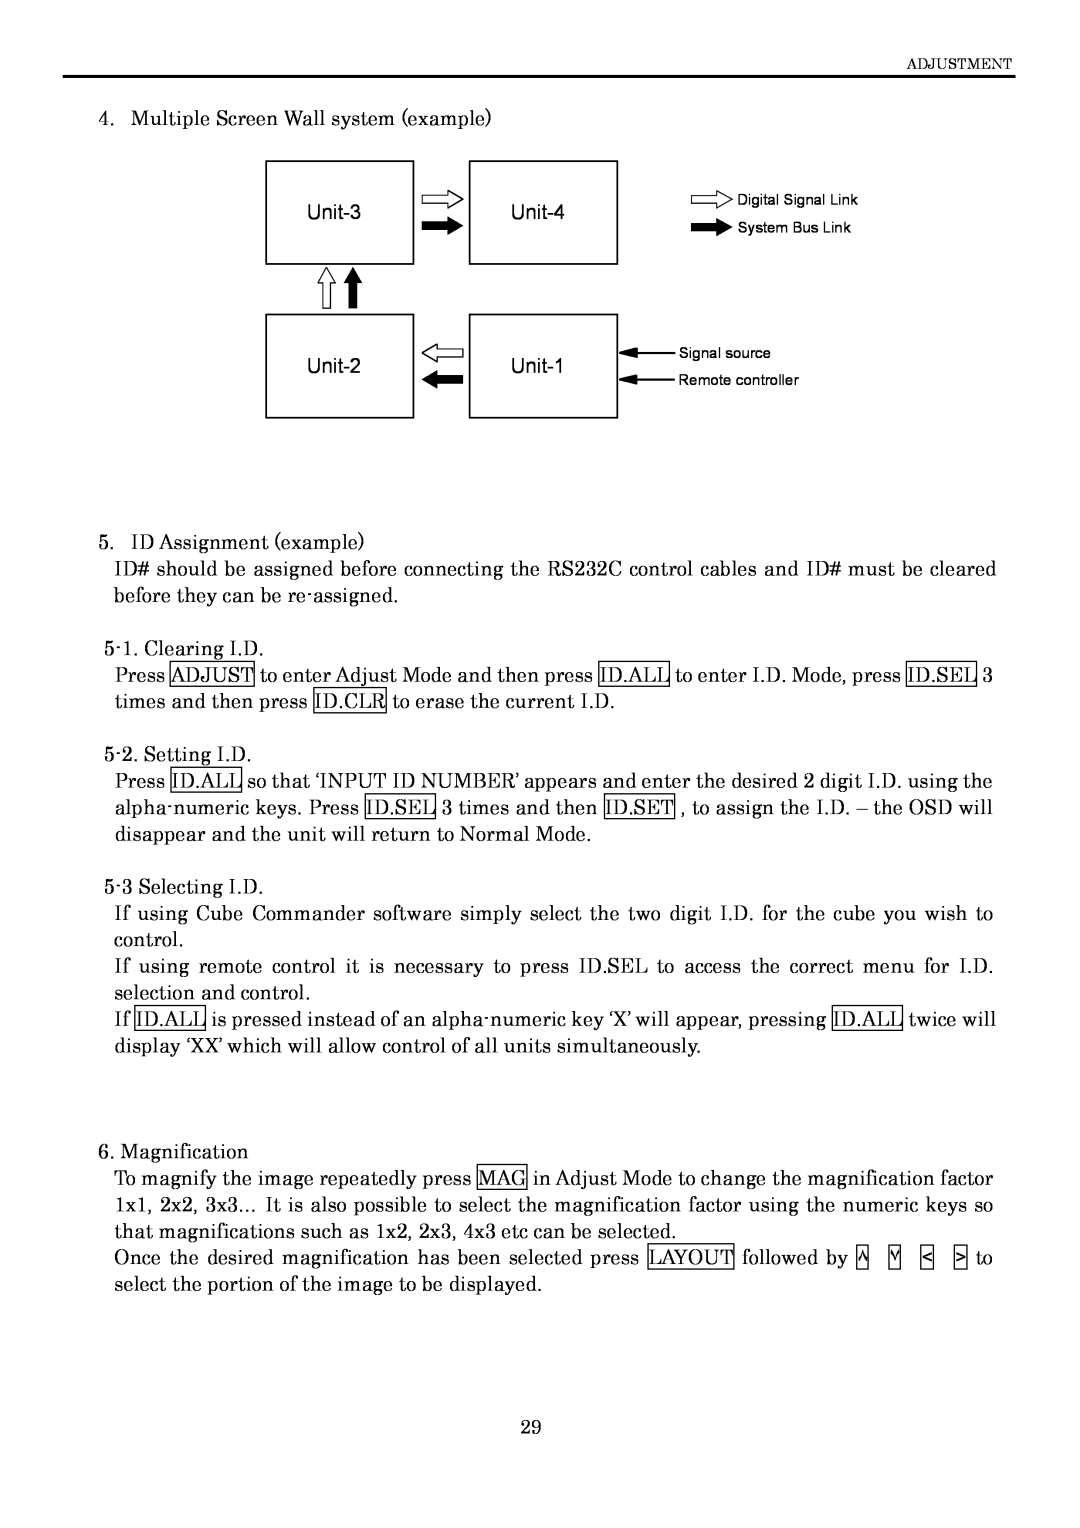 Toshiba P600DL service manual Multiple Screen Wall system example 